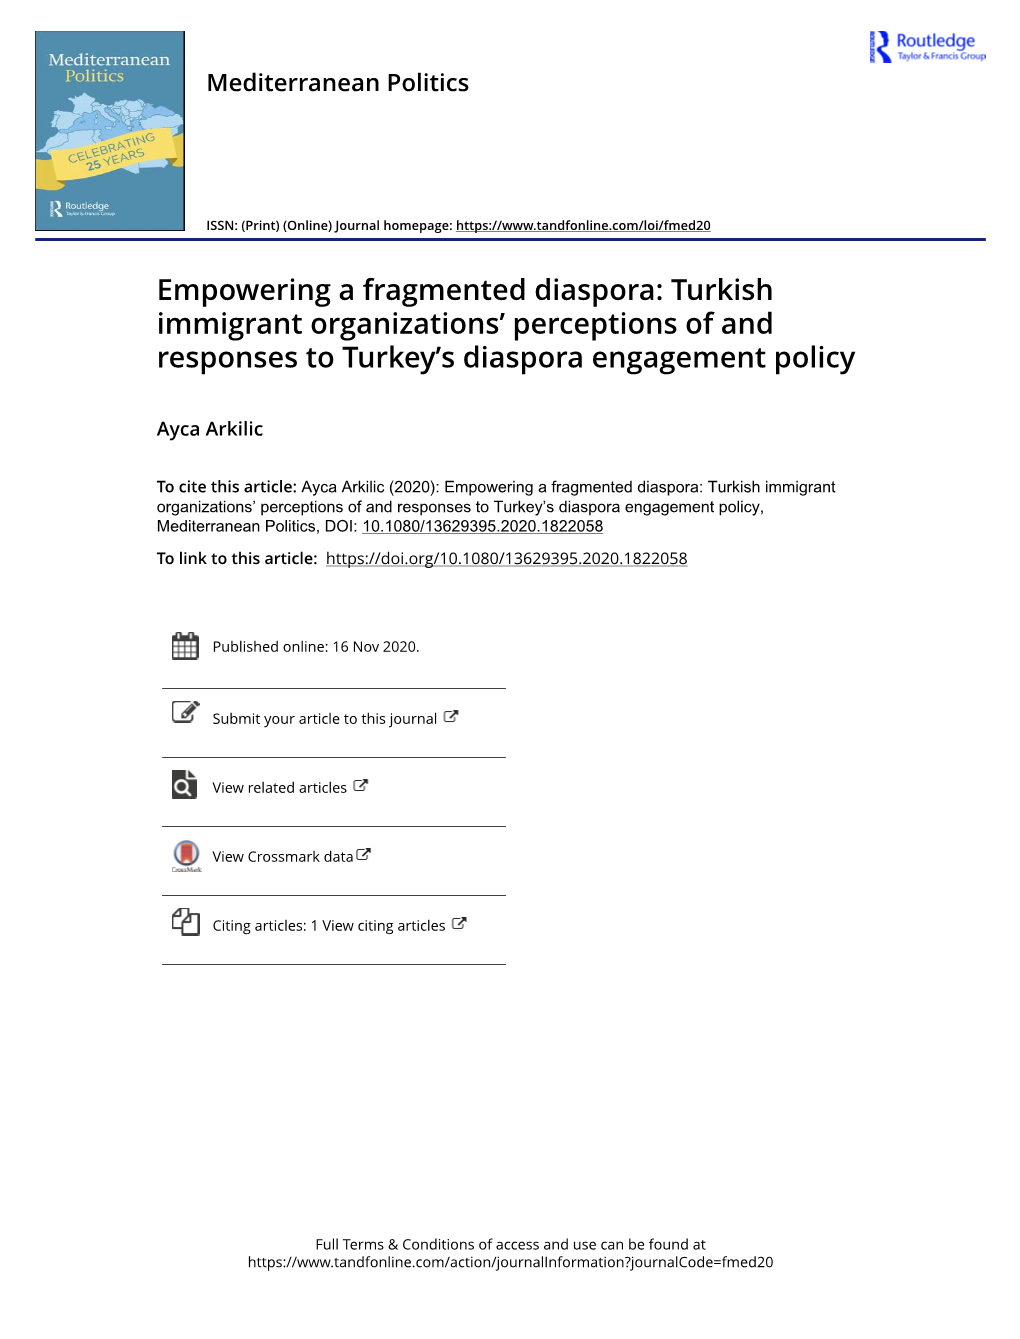 Empowering a Fragmented Diaspora: Turkish Immigrant Organizations’ Perceptions of and Responses to Turkey’S Diaspora Engagement Policy